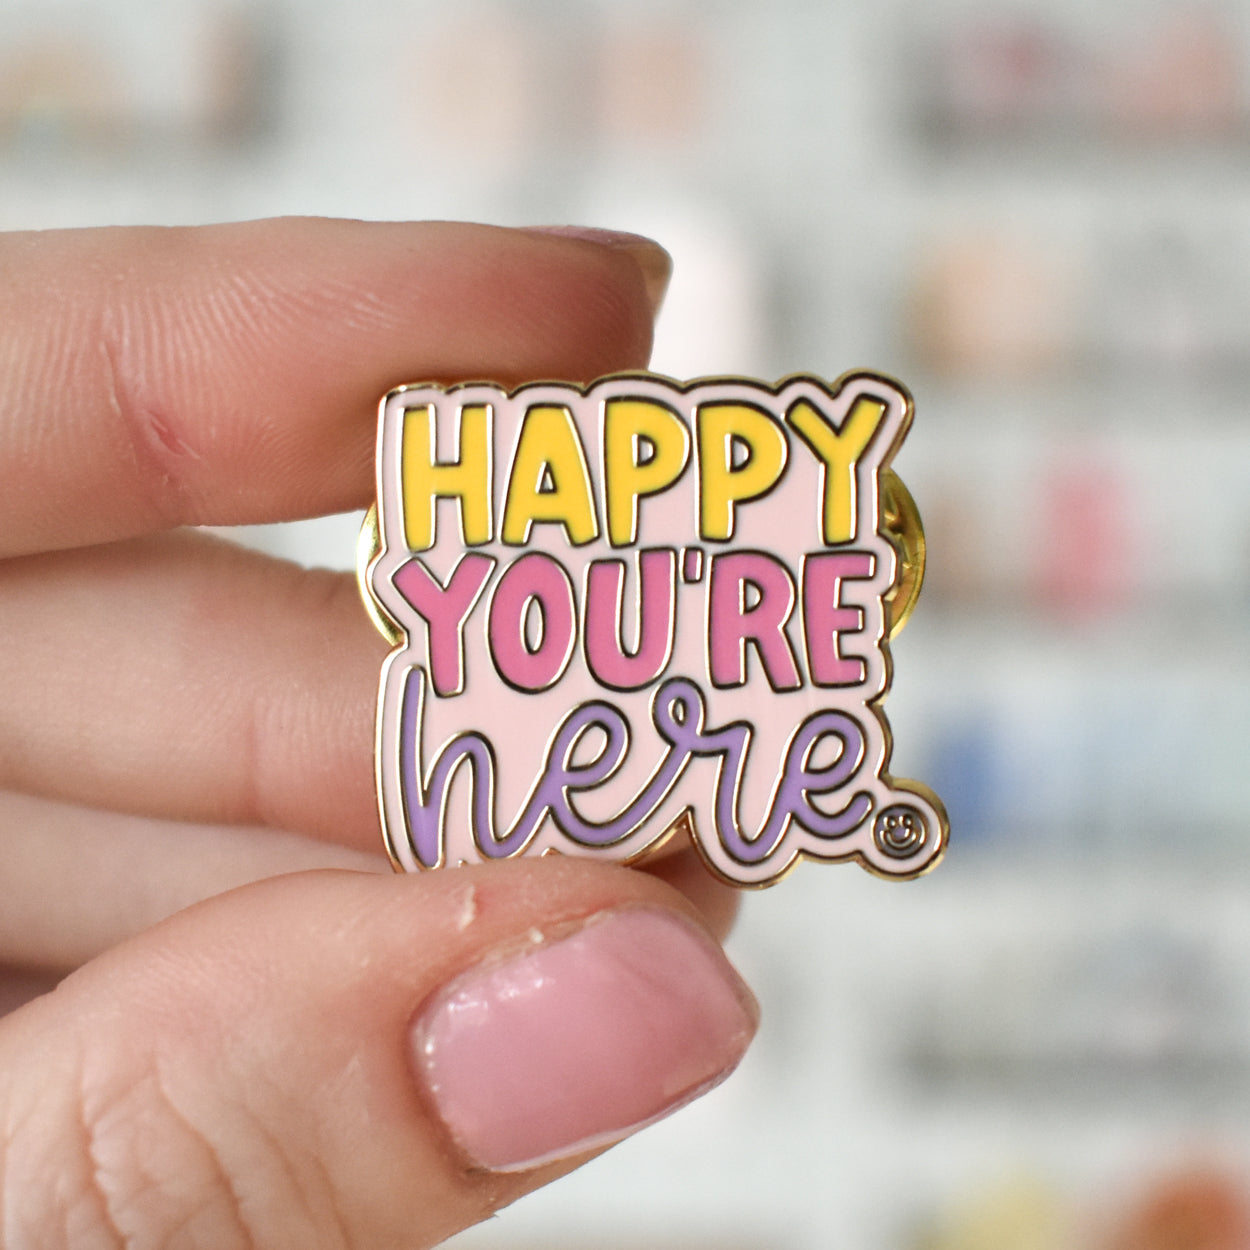 Happy You're Here Pin